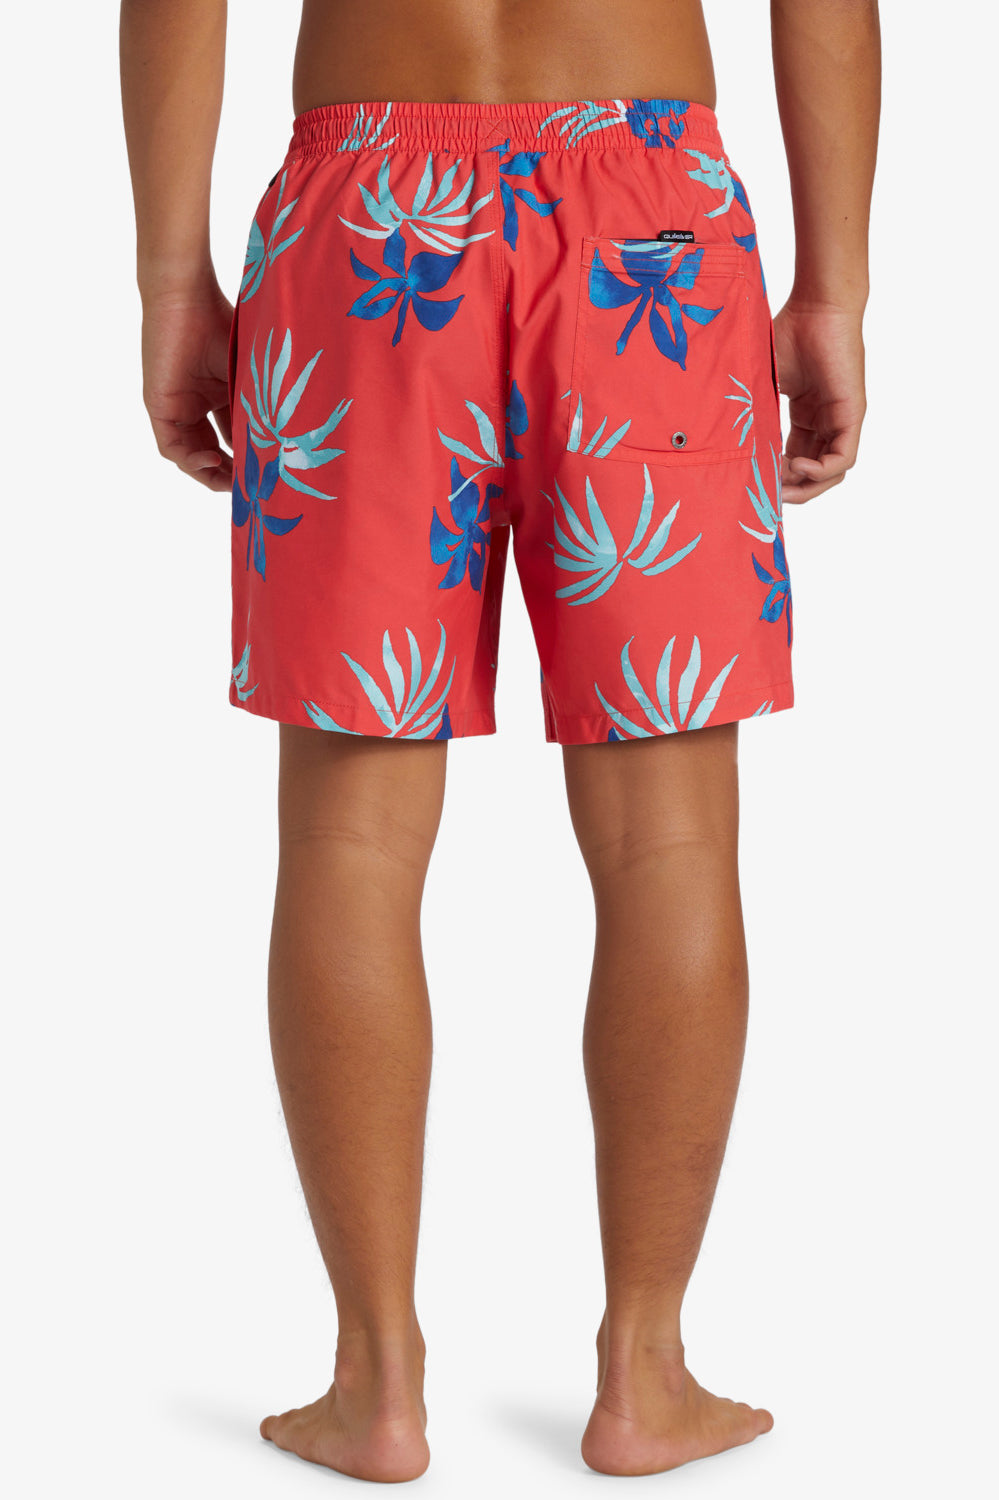 Quiksilver: Everyday Mix 17" Volley Shorts